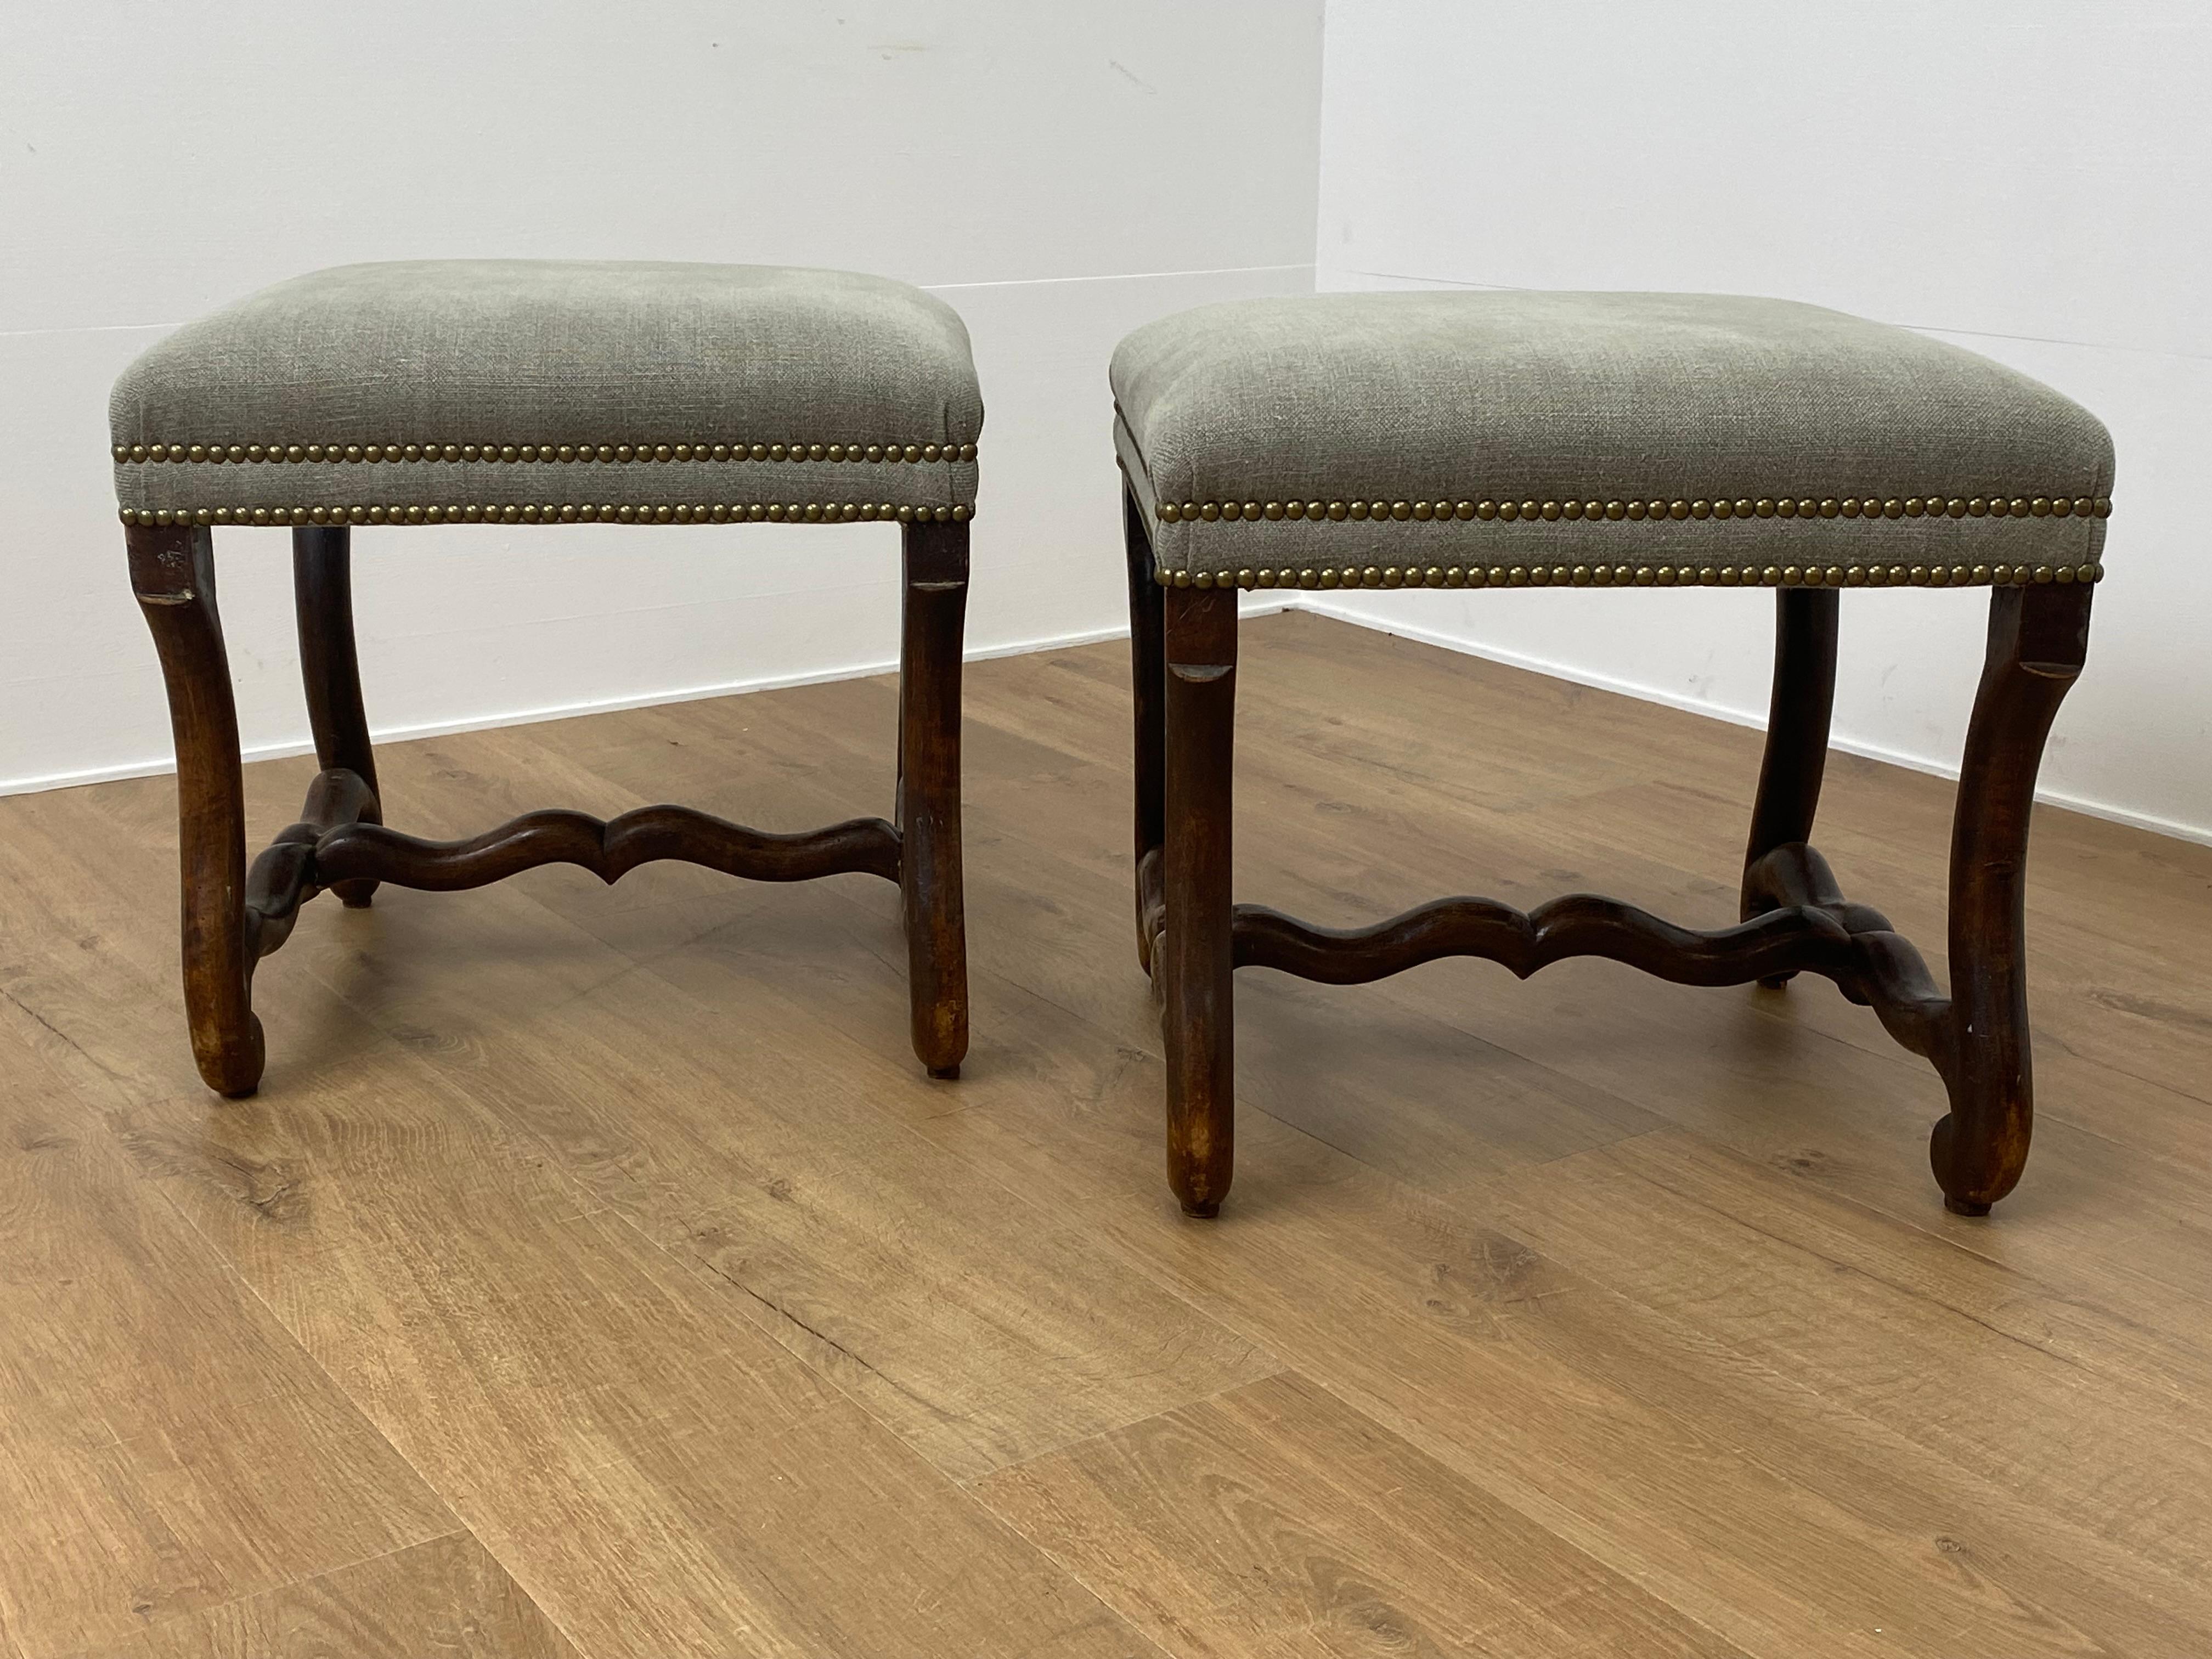 Elegant Pair of French Footstools in Louis XIII Style,
good patina and wear of the Walnut,
new upholstery in a Green Fabric finished with Copper Nails,
very decorative pair of Footstools